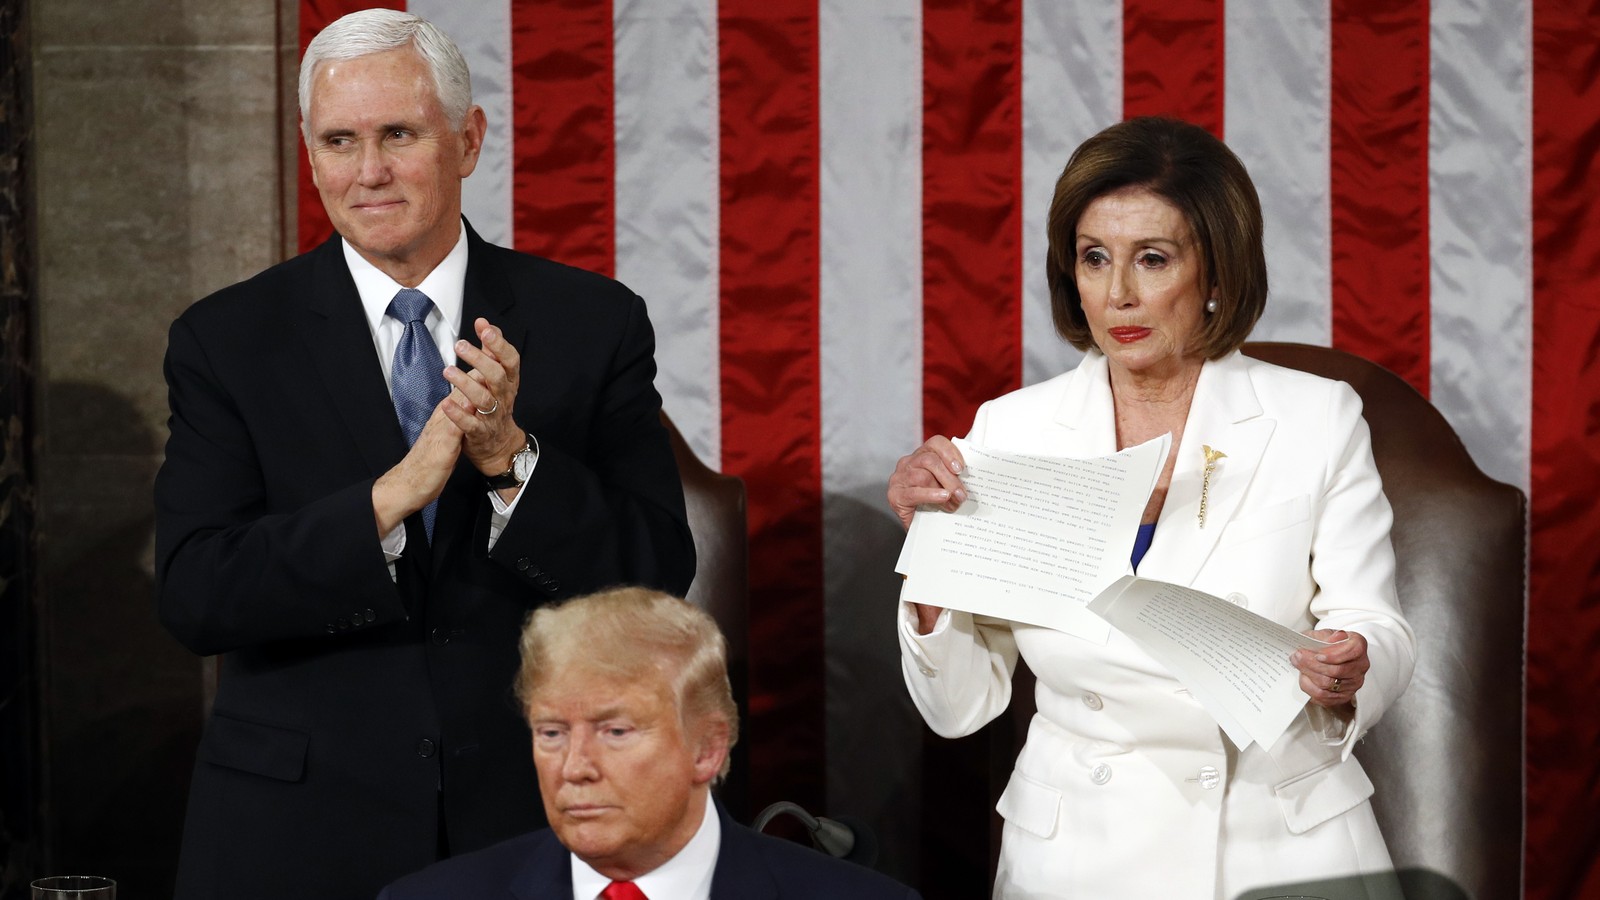 Women send political message by wearing white to Trump's State of the Union  - ABC News